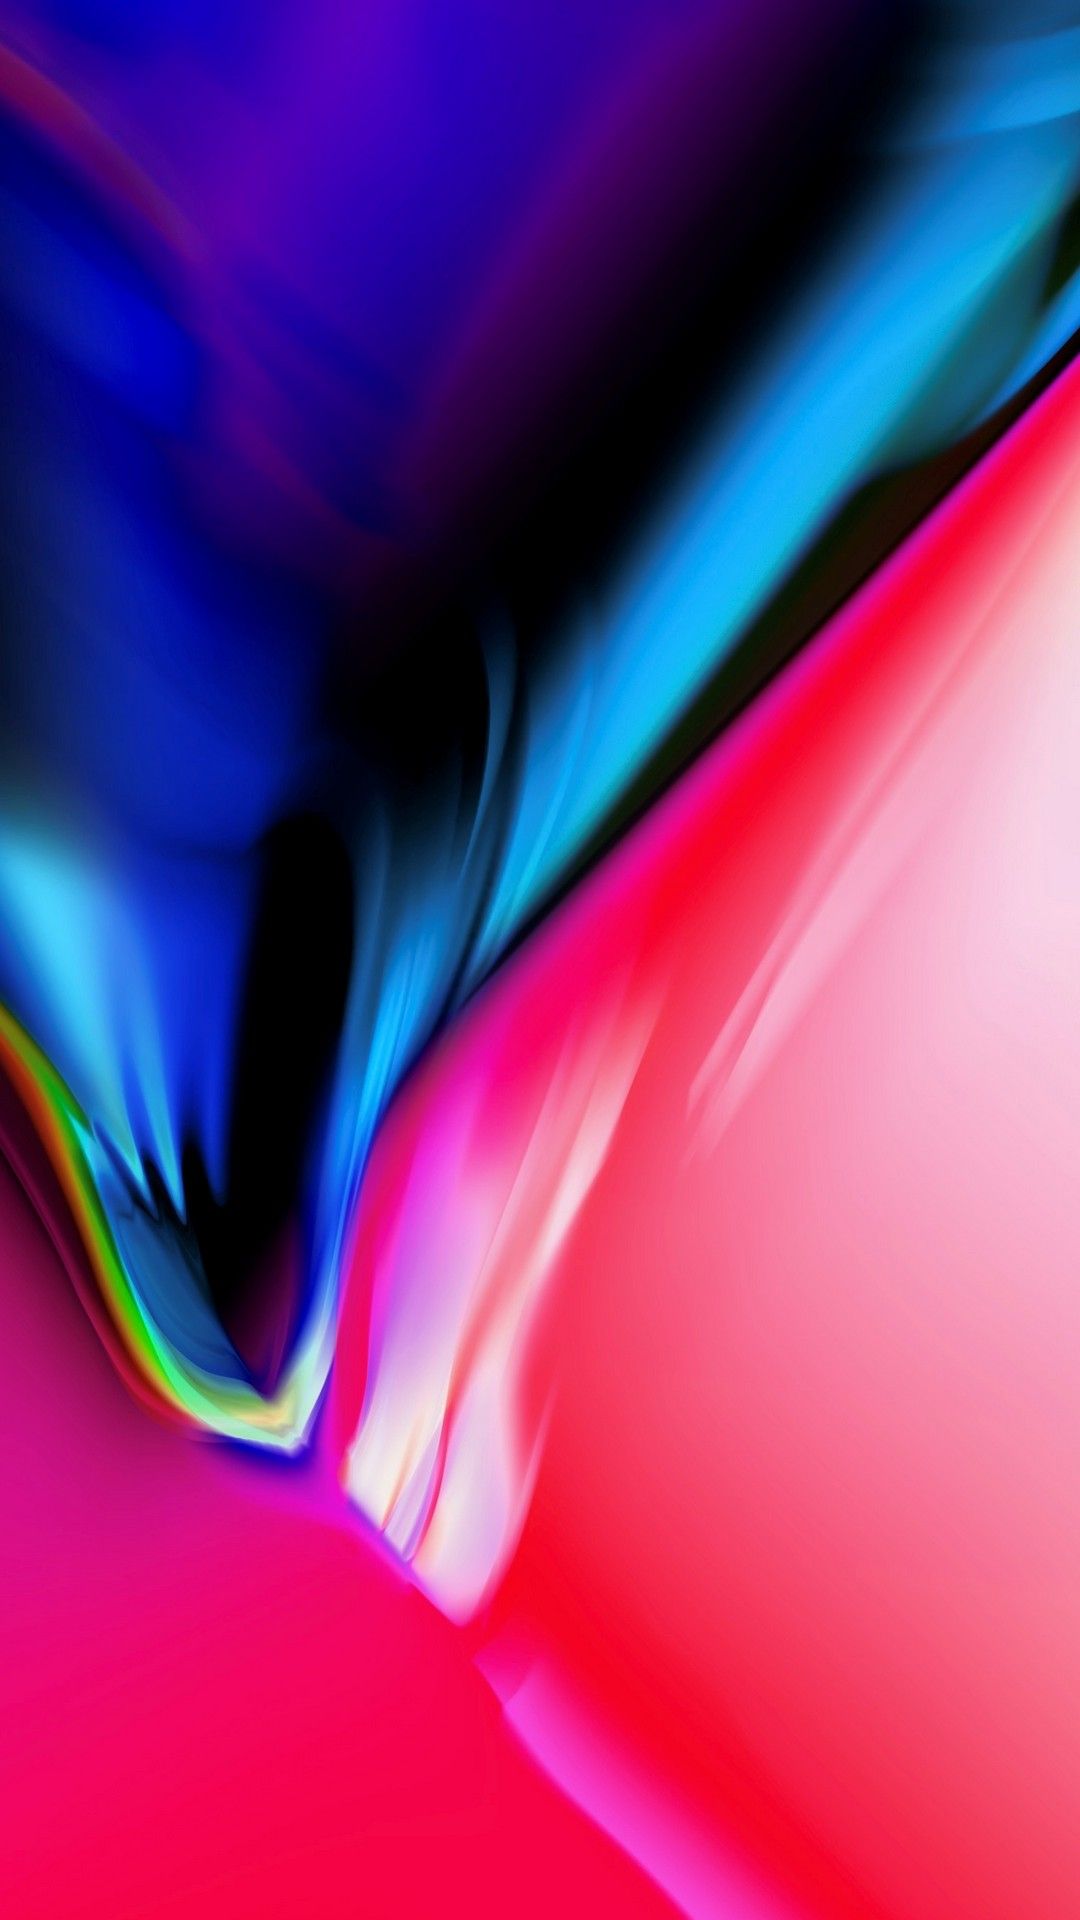 Latest iPhone 8 Wallpapers - Wallpaper Cave